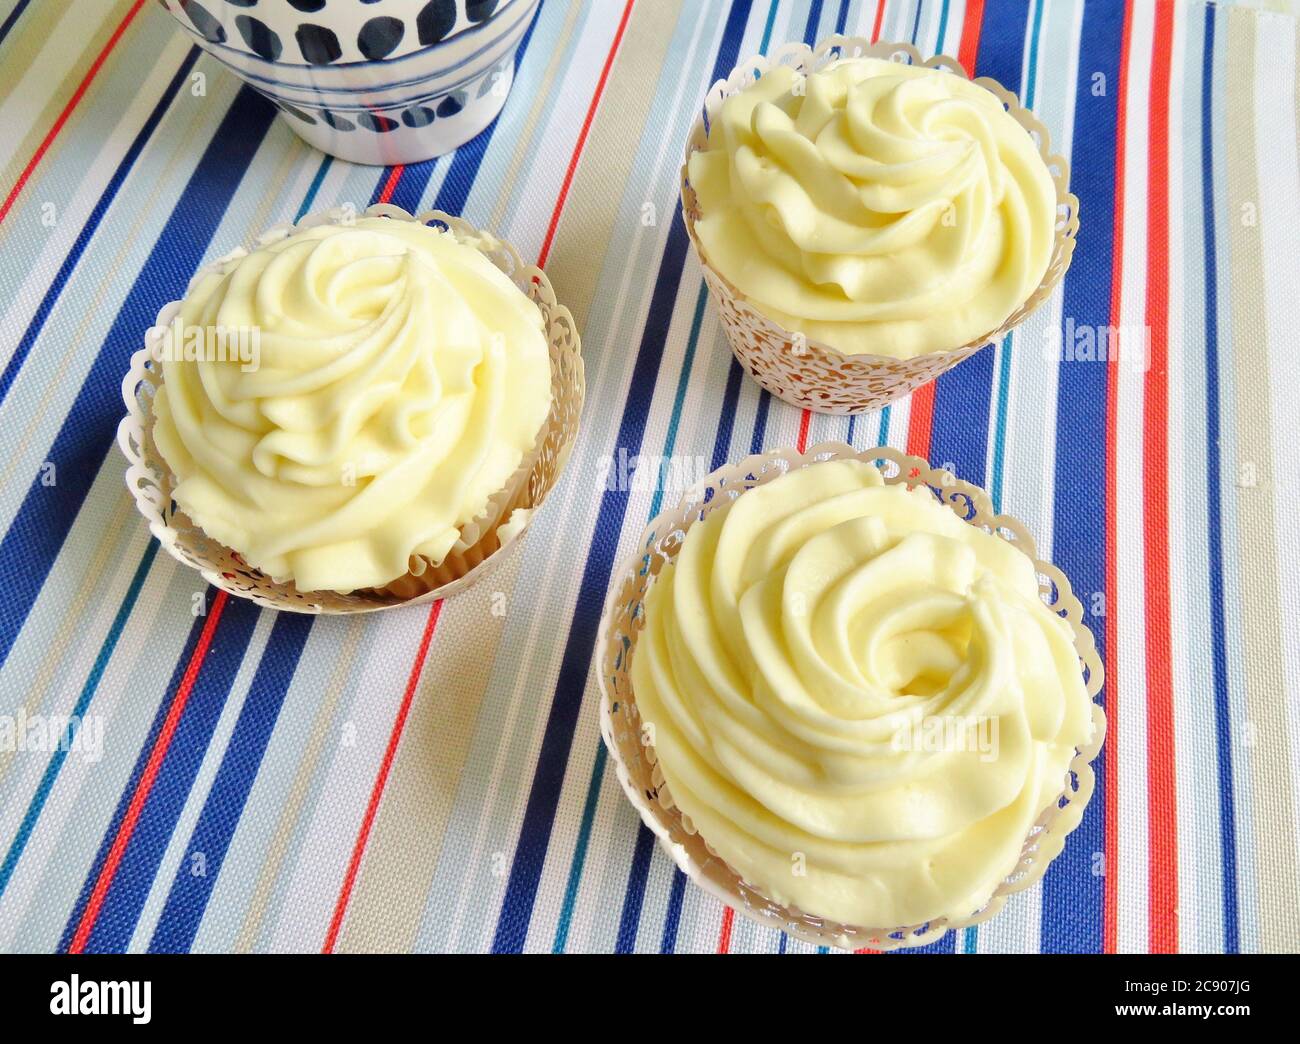 Cupcakes decorated with a vanilla frosting for birthdays, weddings, or showers Stock Photo